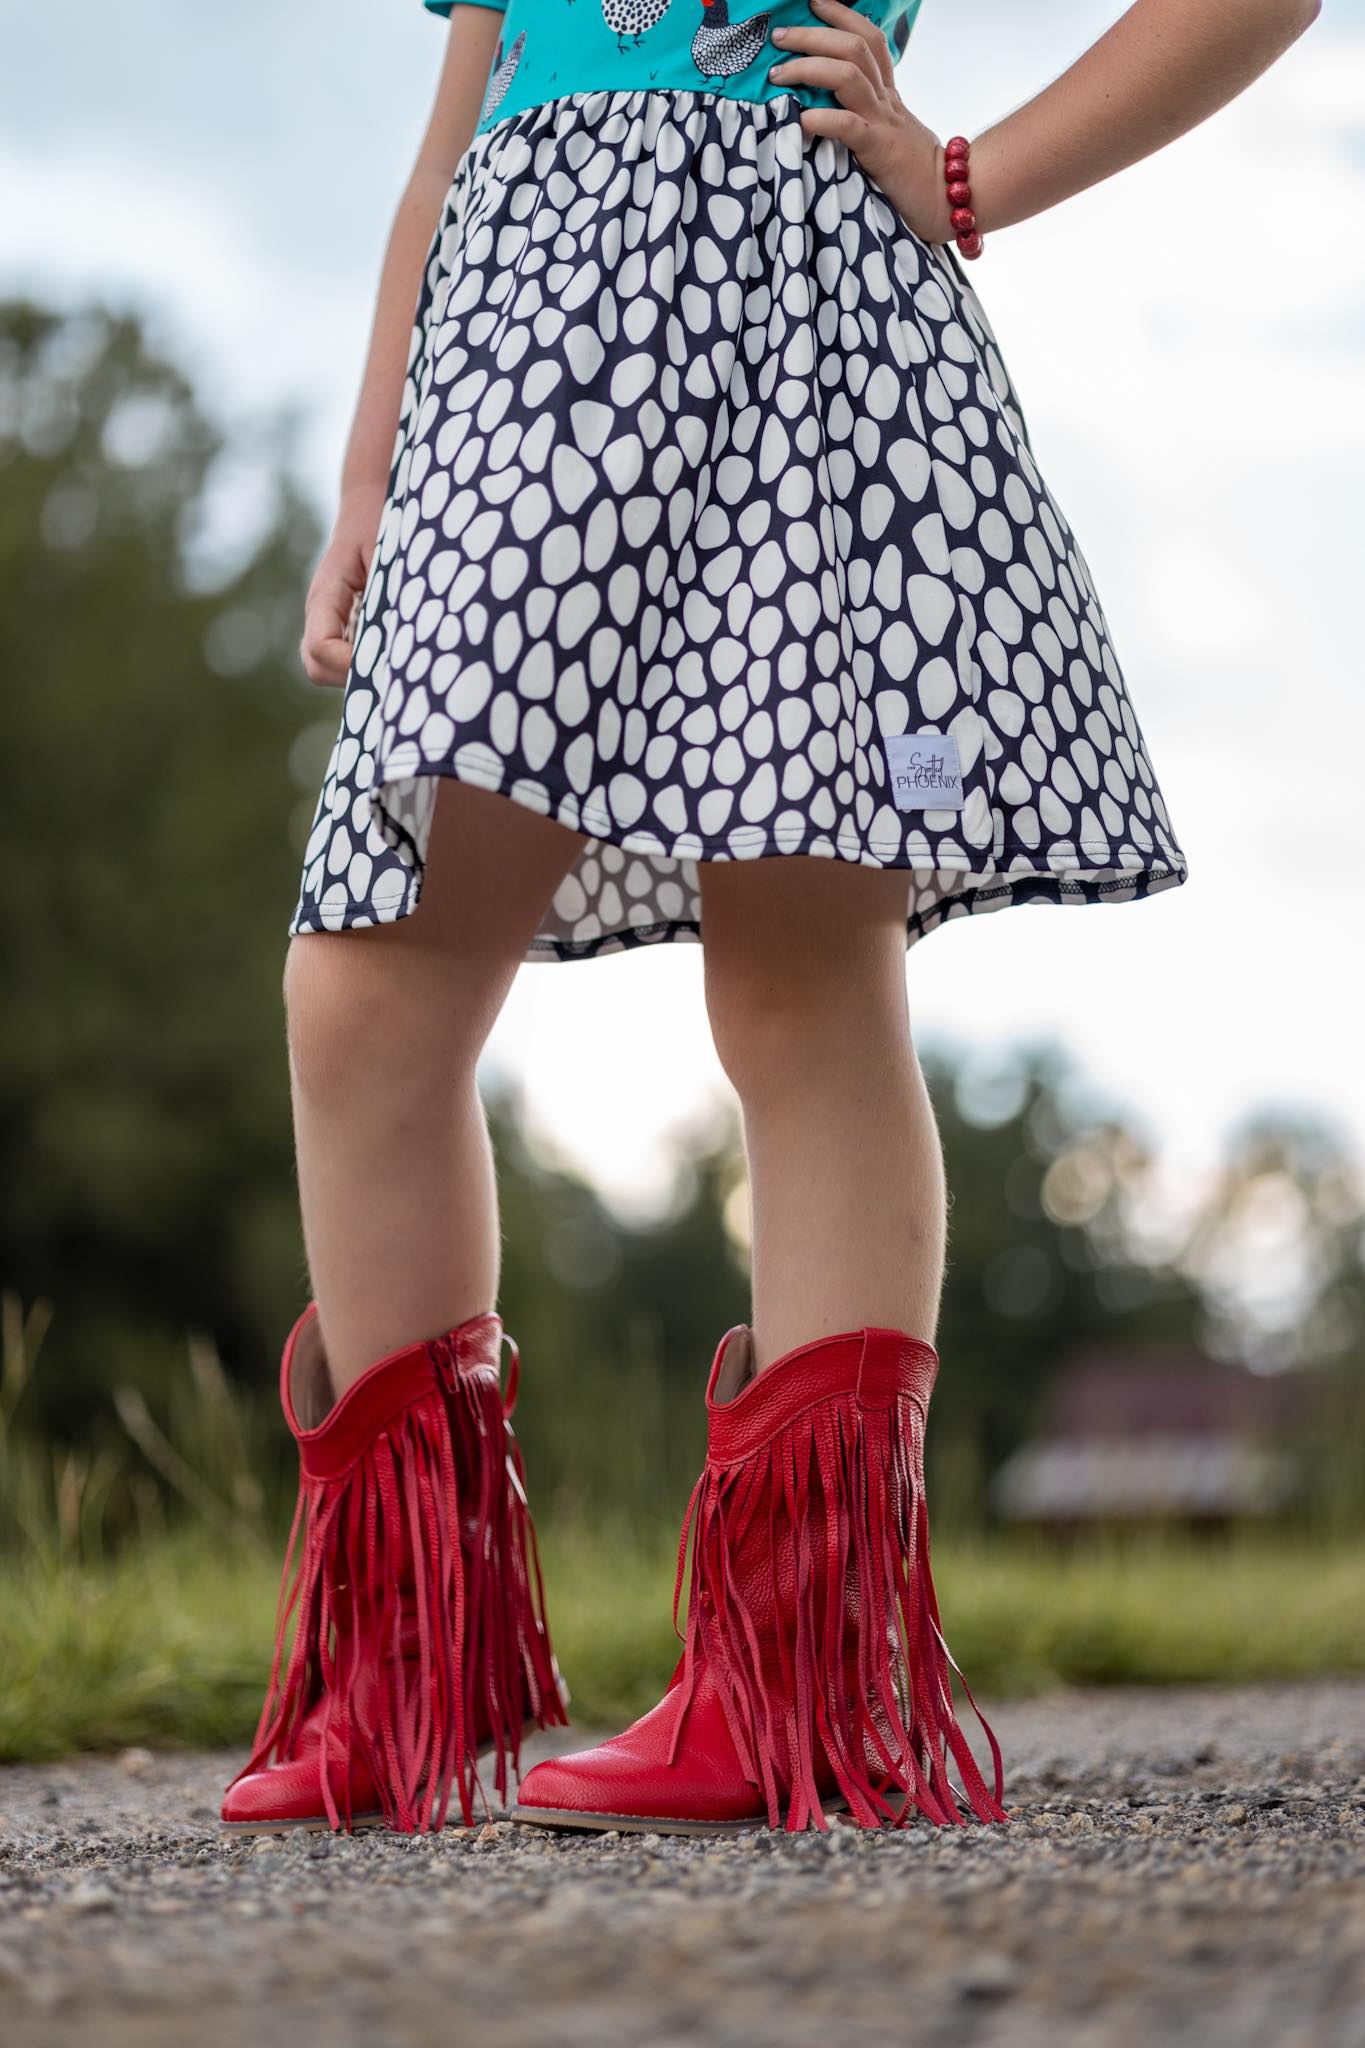 [Red] Cowboy Boots